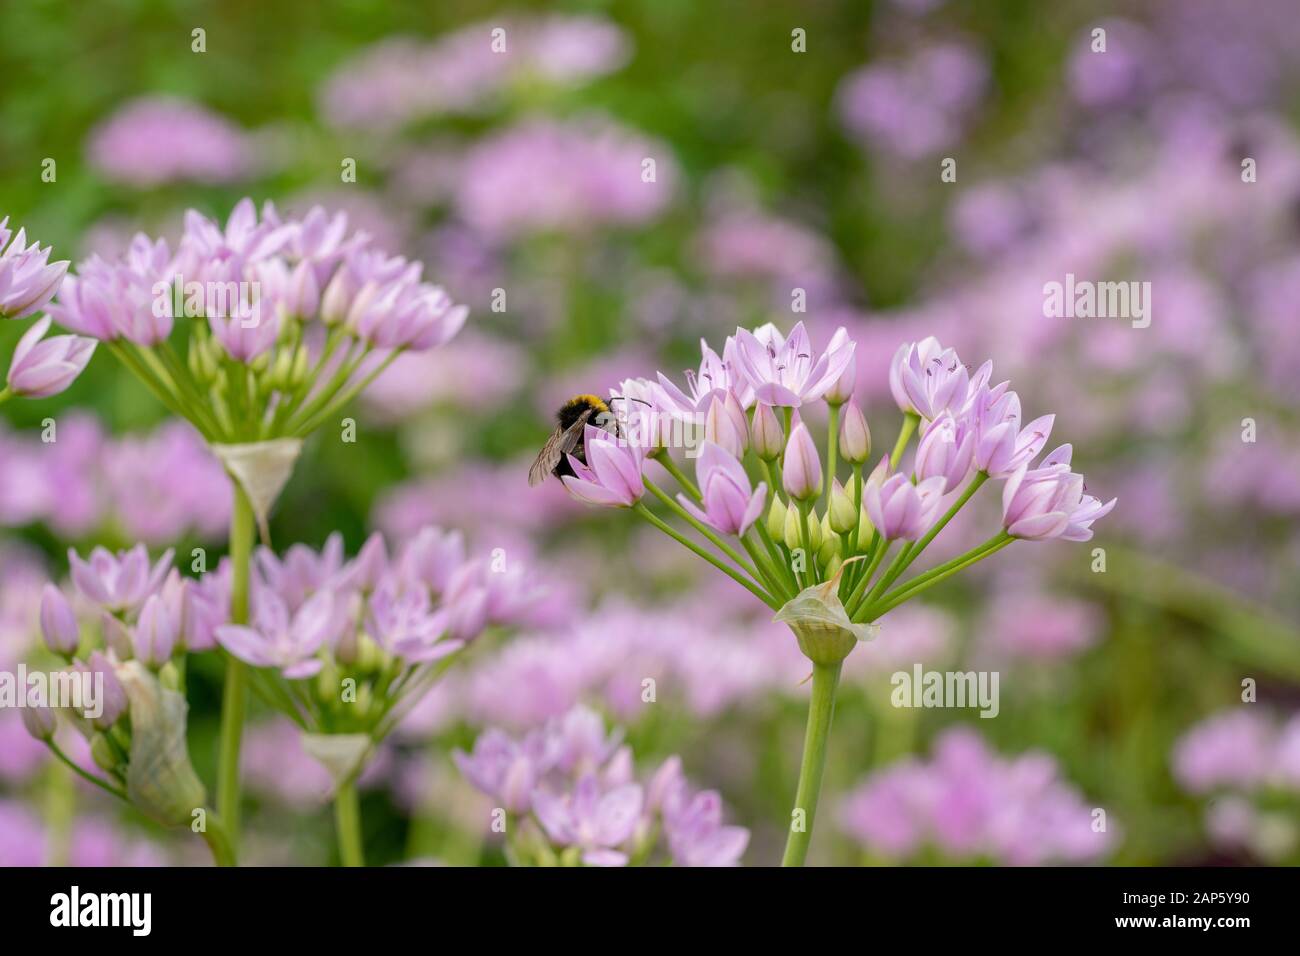 Close up of Allium unifolium 'Eros'  flower head, with bee feeding, with other pink alliums in background Stock Photo